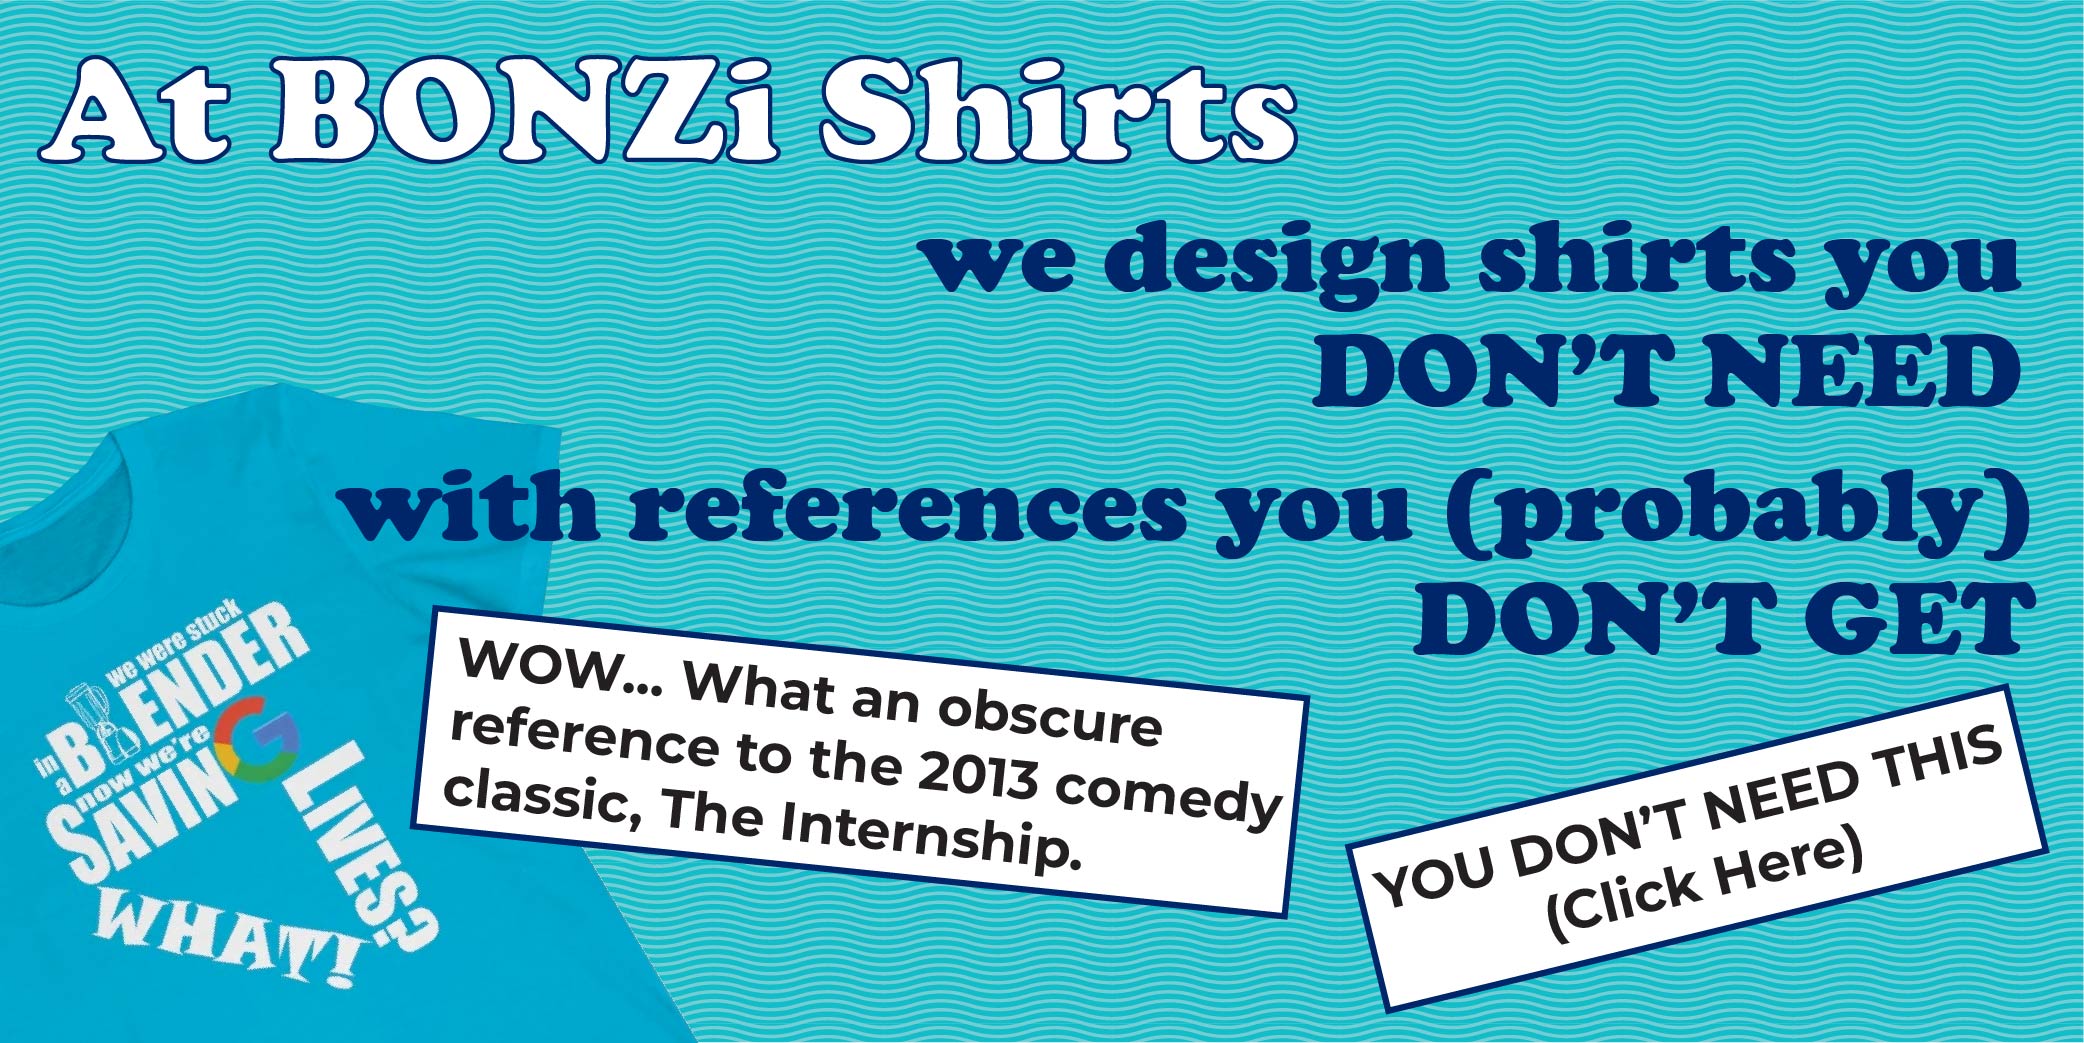 At BONZi Shirts we design shirts you don't need with references you (probably) don't get